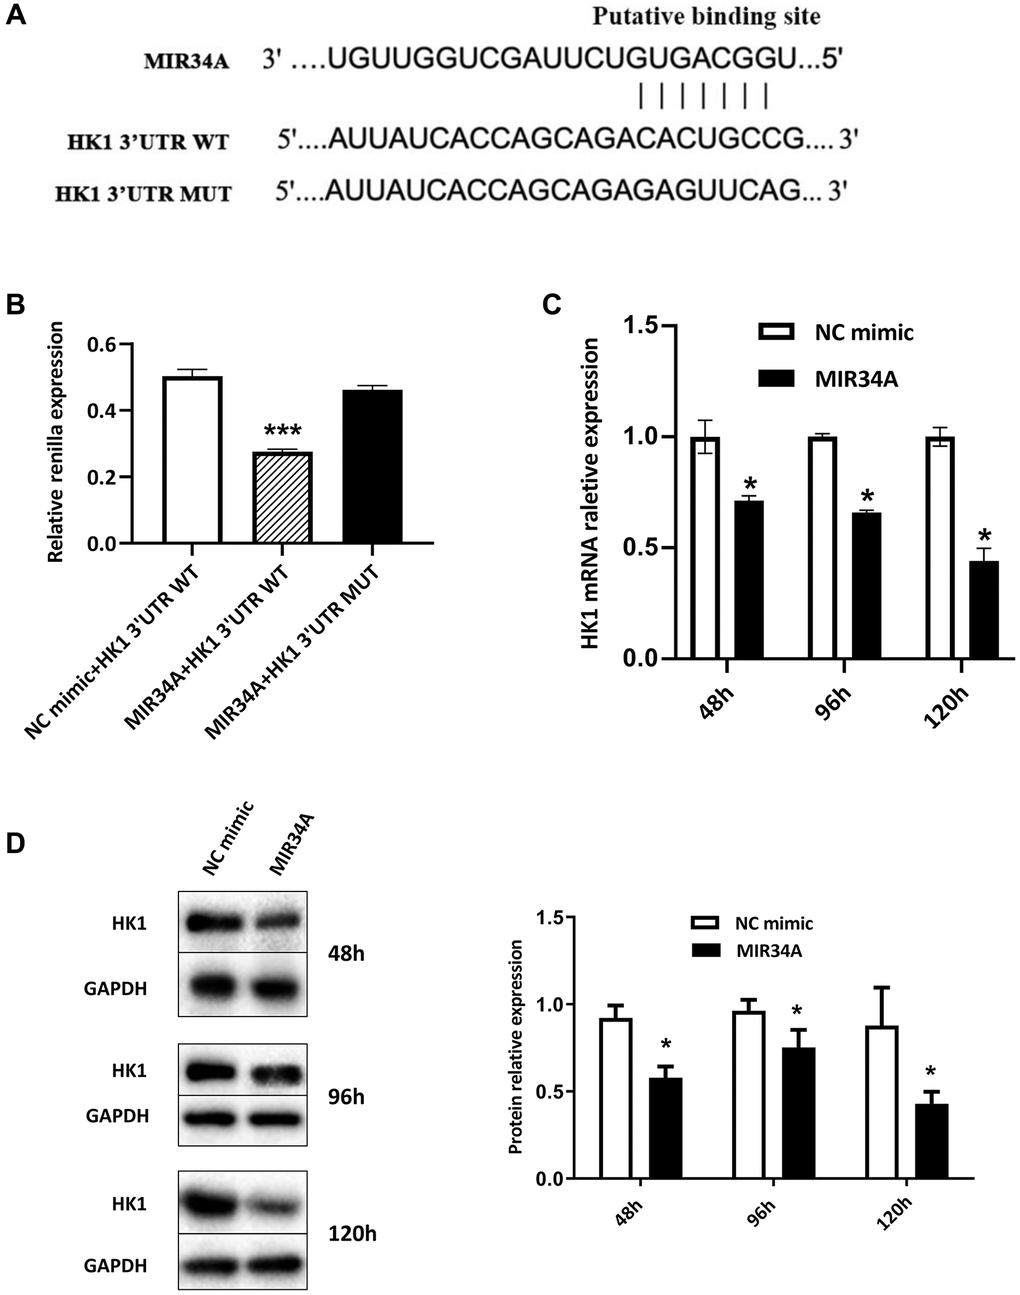 MIR34A directly targets and represses the expression of HK1. (A) A Bioinformatics-based target analysis showed that HK1 is a potential target of MIR34A. (B) The 293T cells were transfected with MIR34A and HK1 3’UTR WT co-transfected into 293T cells. Luciferase reporter assay showed that the luciferase activity of HK1 3′UTR-WT significantly decreased with MIR34A mimic transfection, compared to that of the NC mimic or HK1 3′UTR-mutant group. (C) RT-qPCR analysis was performed to detect the expression of HK1 after MIR34A mimics were transfected into SRA01/04 cells at 48 h, 96 h, and 120 h. (D) SRA01/04 cells were performed as C, and the expression of HK1 was detected by western blot. *P ***P 